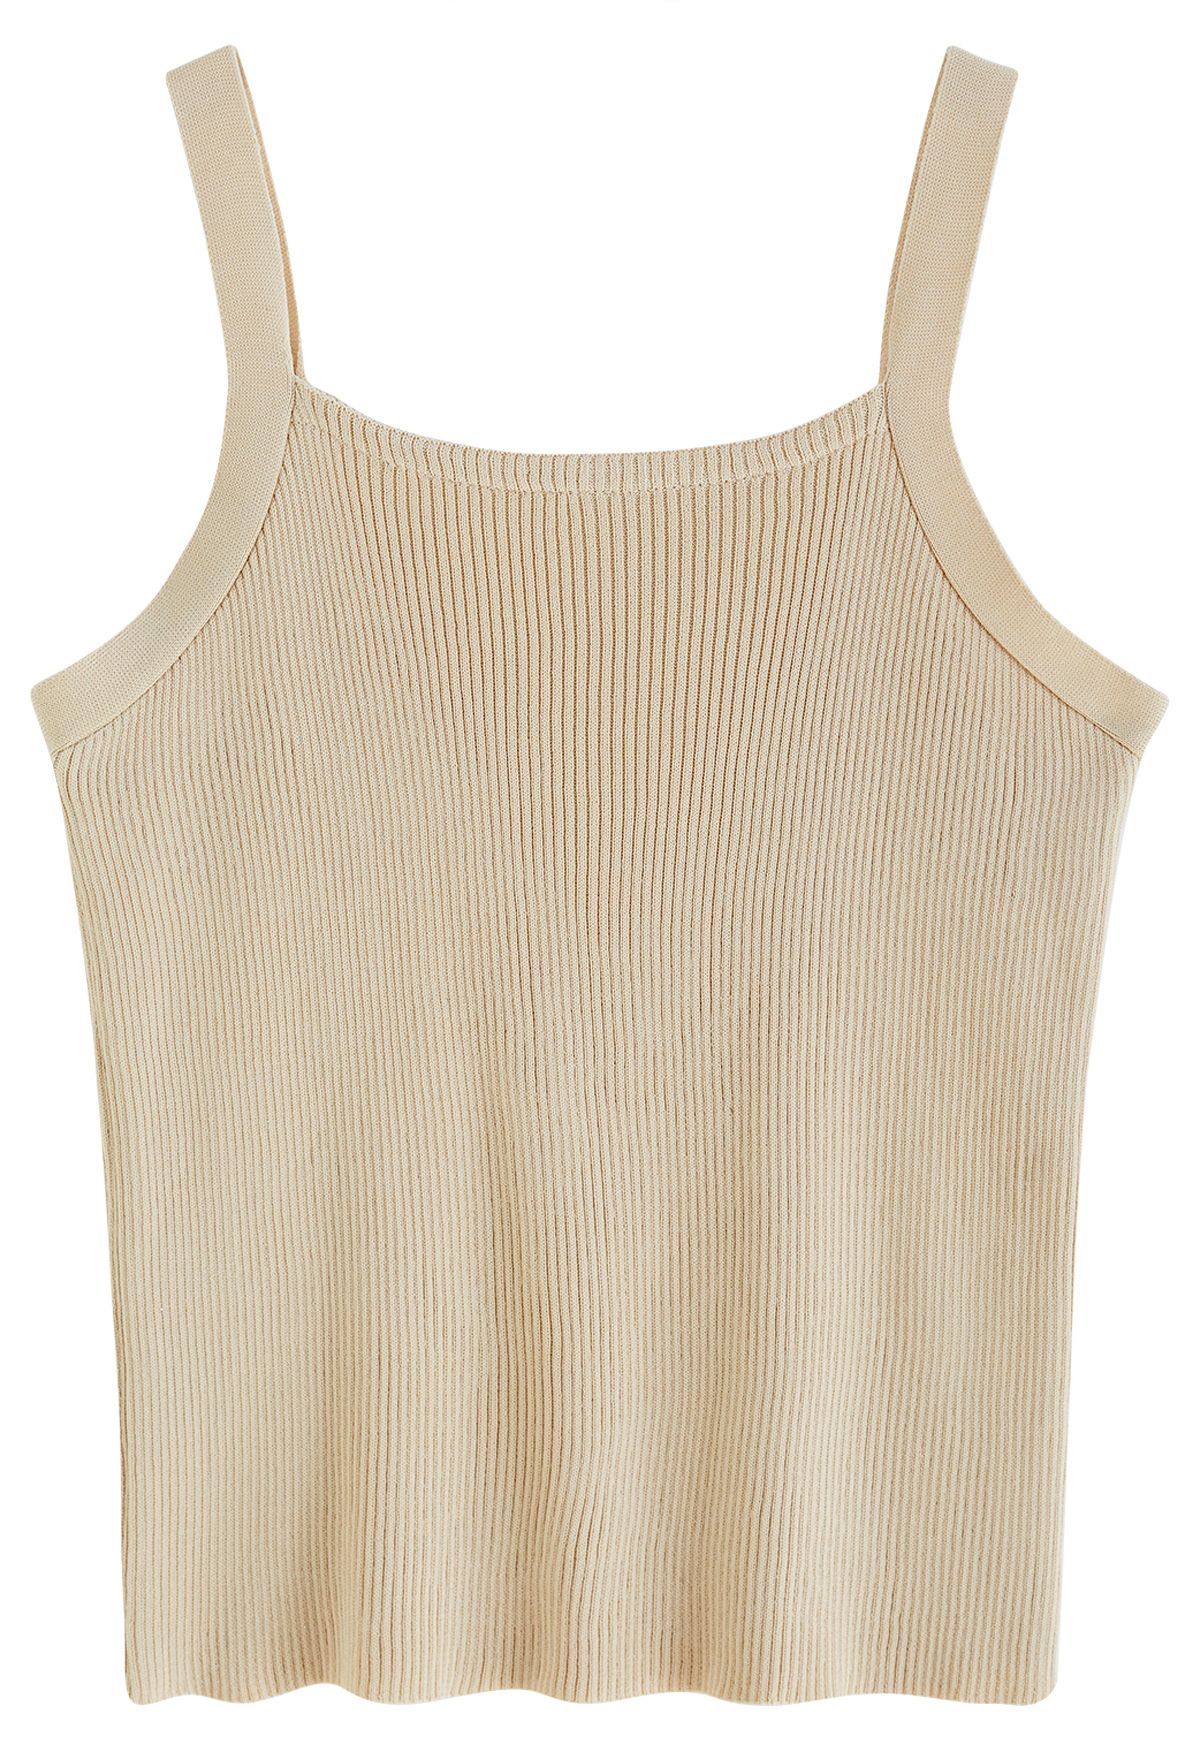 Stretchy Ribbed Knit Cami Top in Light Tan